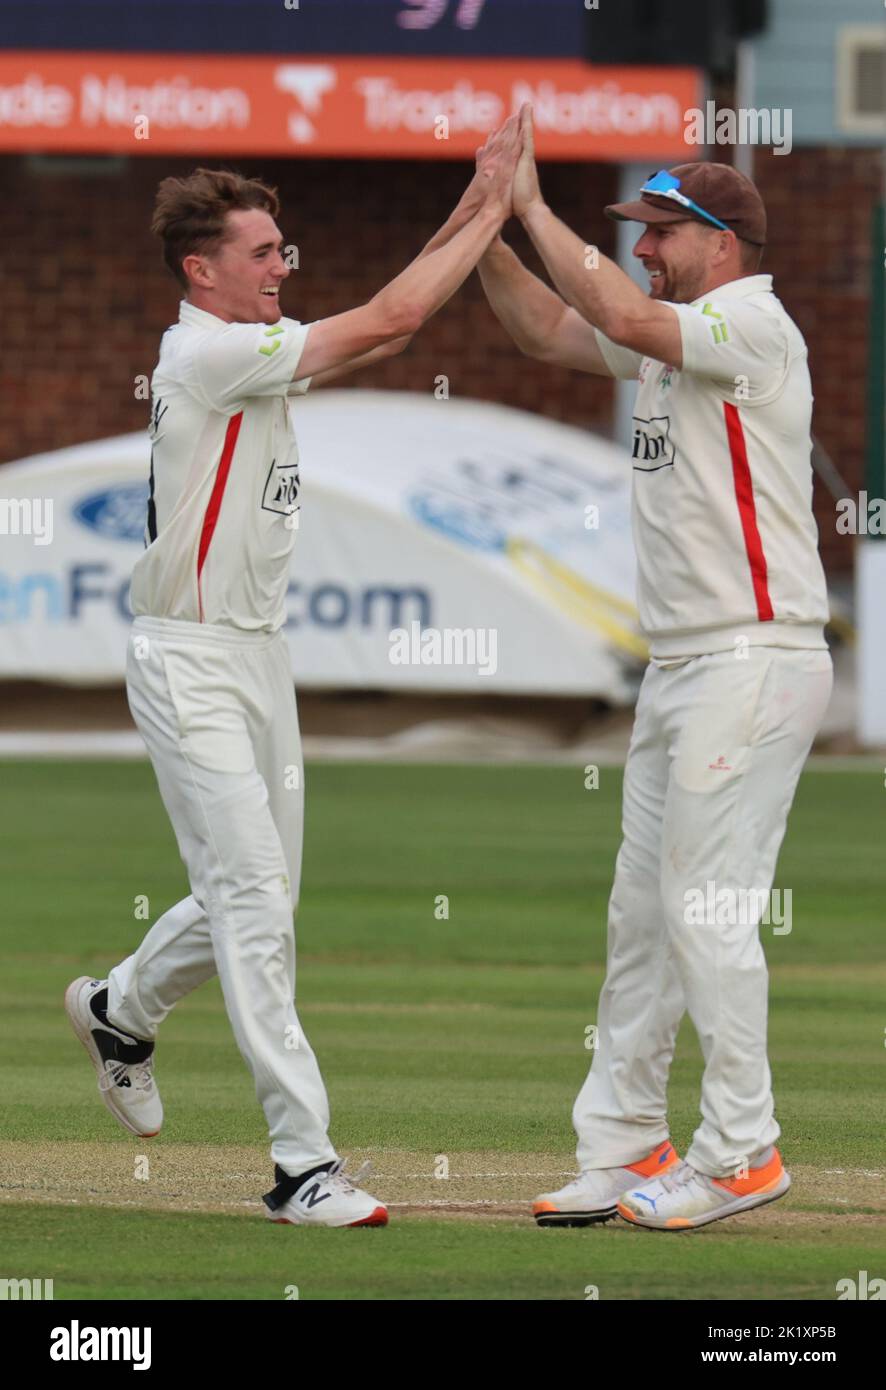 CHELMSFORD ENGLAND - SEPTEMBER 20 : George Balderson of Lancashire CCC  celebrates the catch of Essex's Matt Critchley  during LV= COUNTY CHAMPIONSHIP Stock Photo